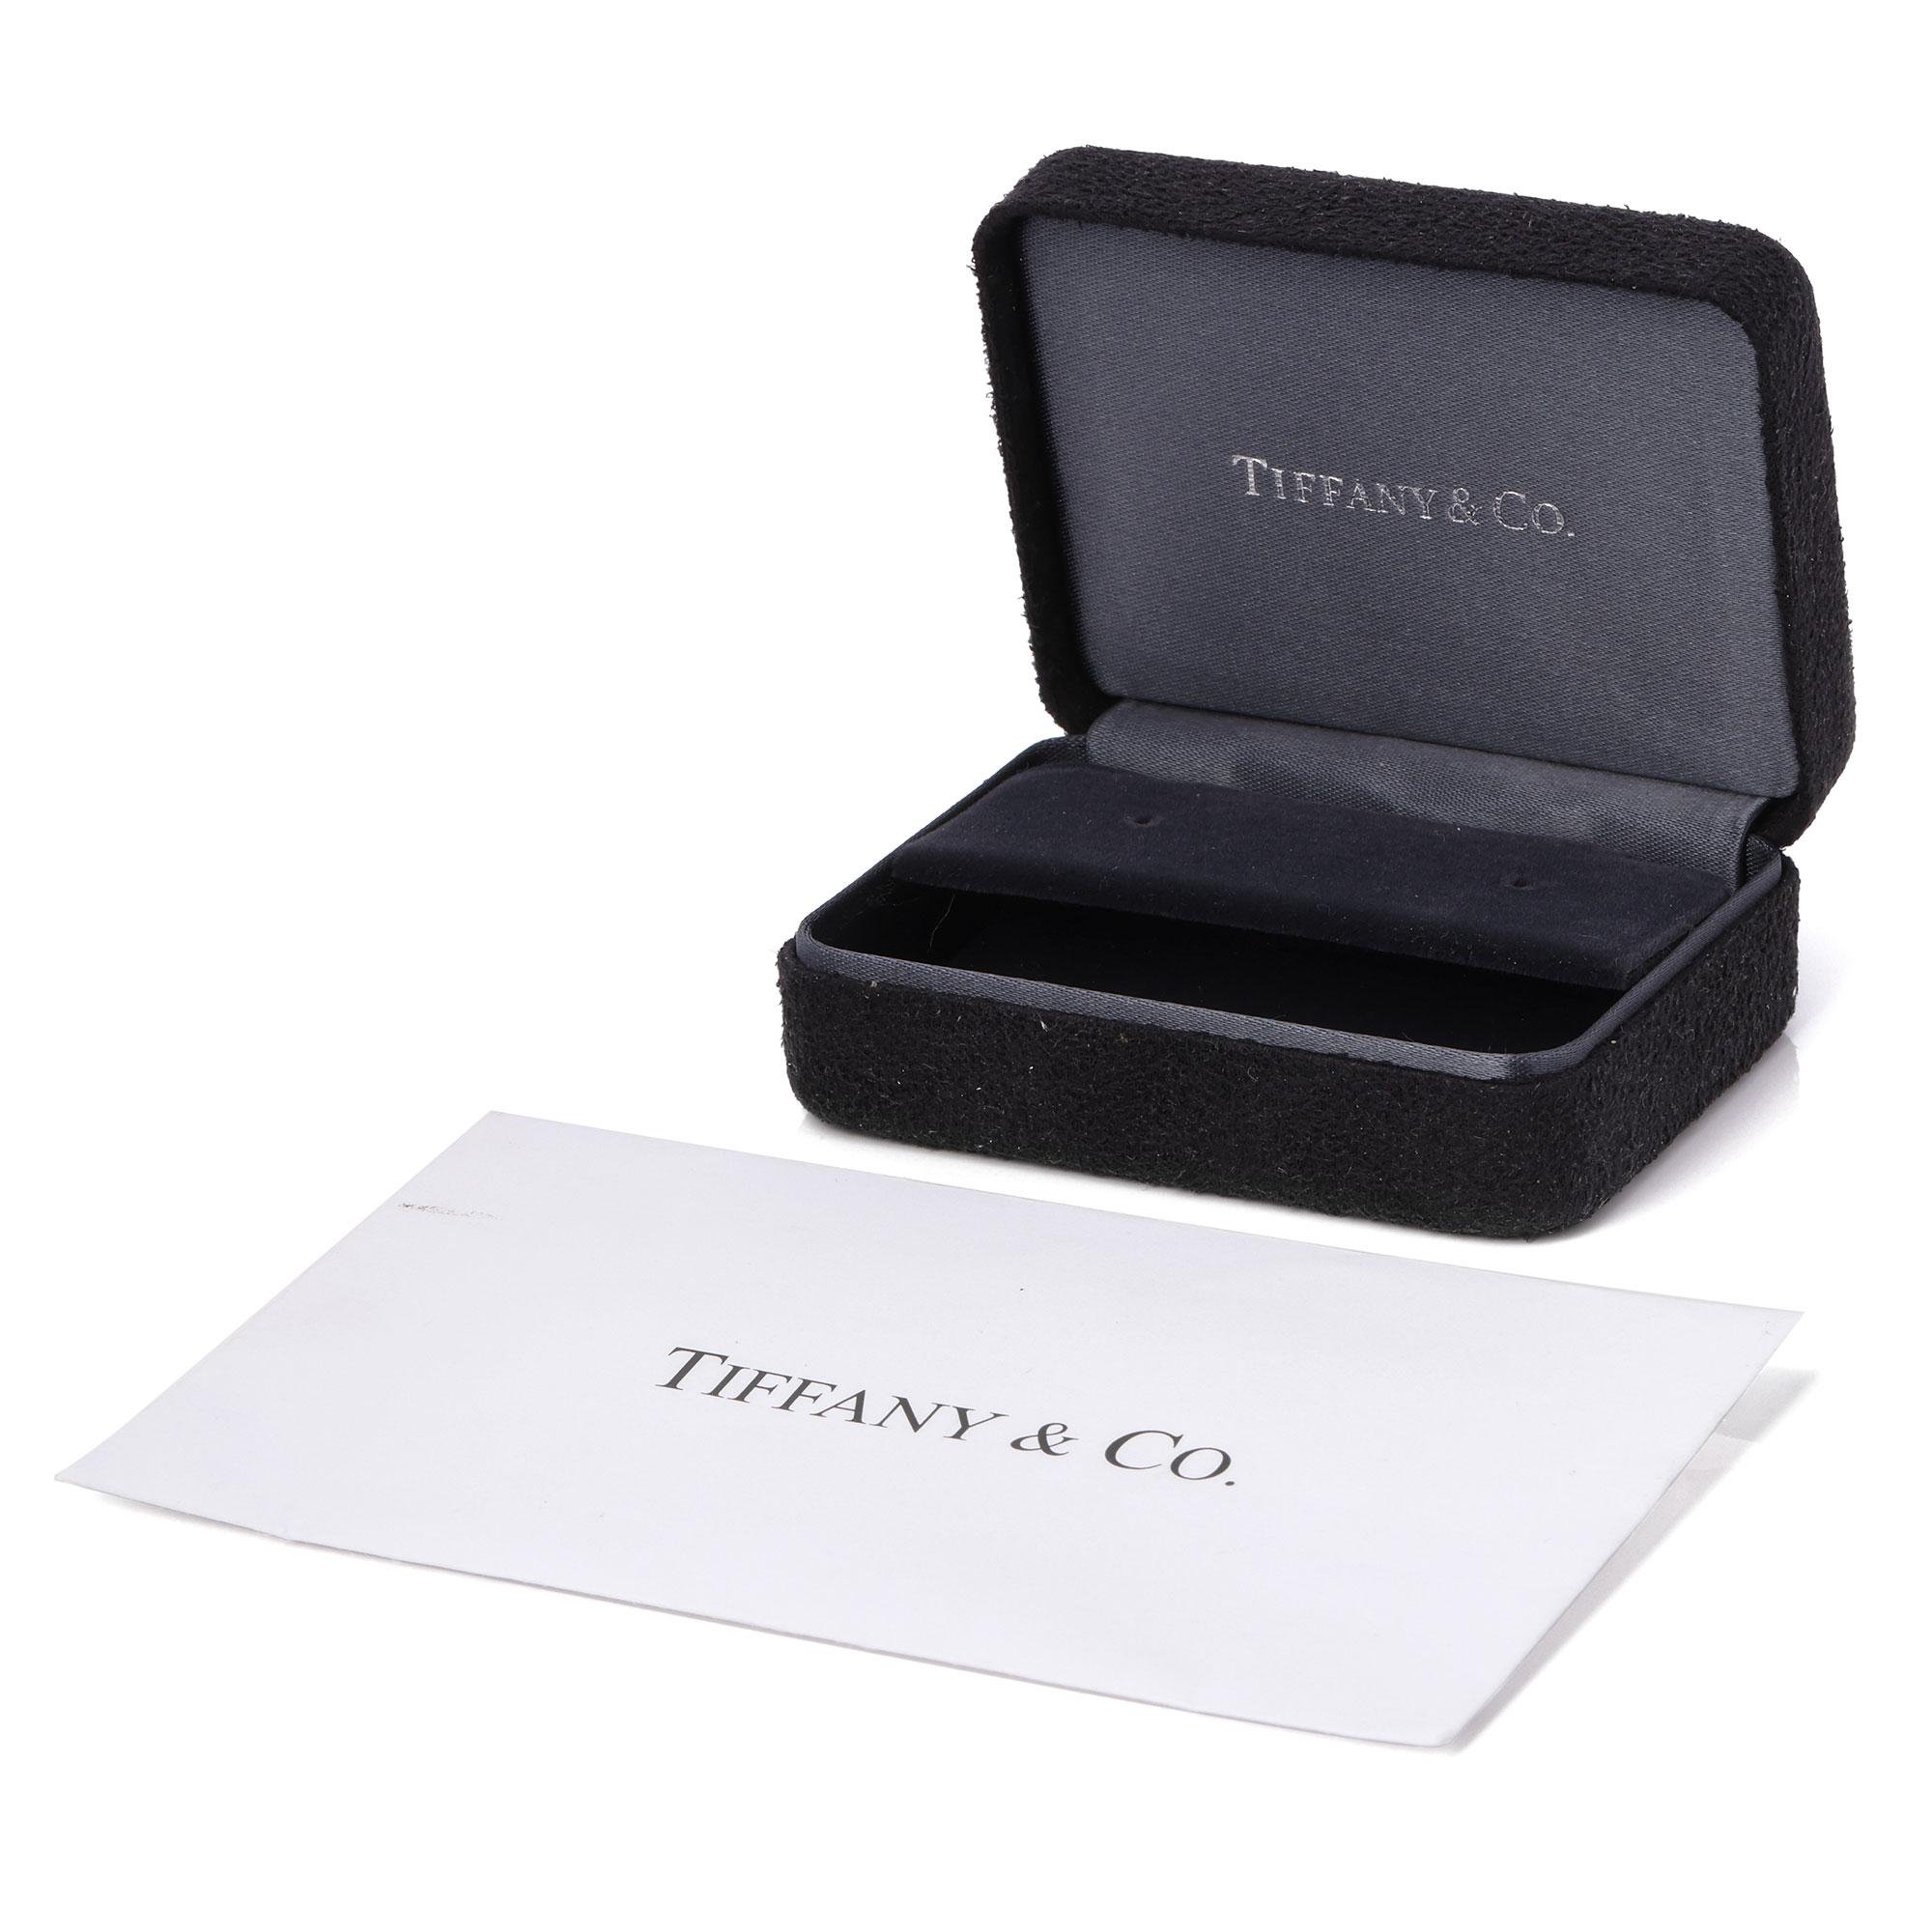 These mini stud earrings by Tiffany & Co are from their Victoria collection and are inspired by the fire and radiance of superlative diamonds. They feature 8 marquis cut diamonds totalling 0.19ct, colour F/G, clarity VS made in platinum. Accompanied